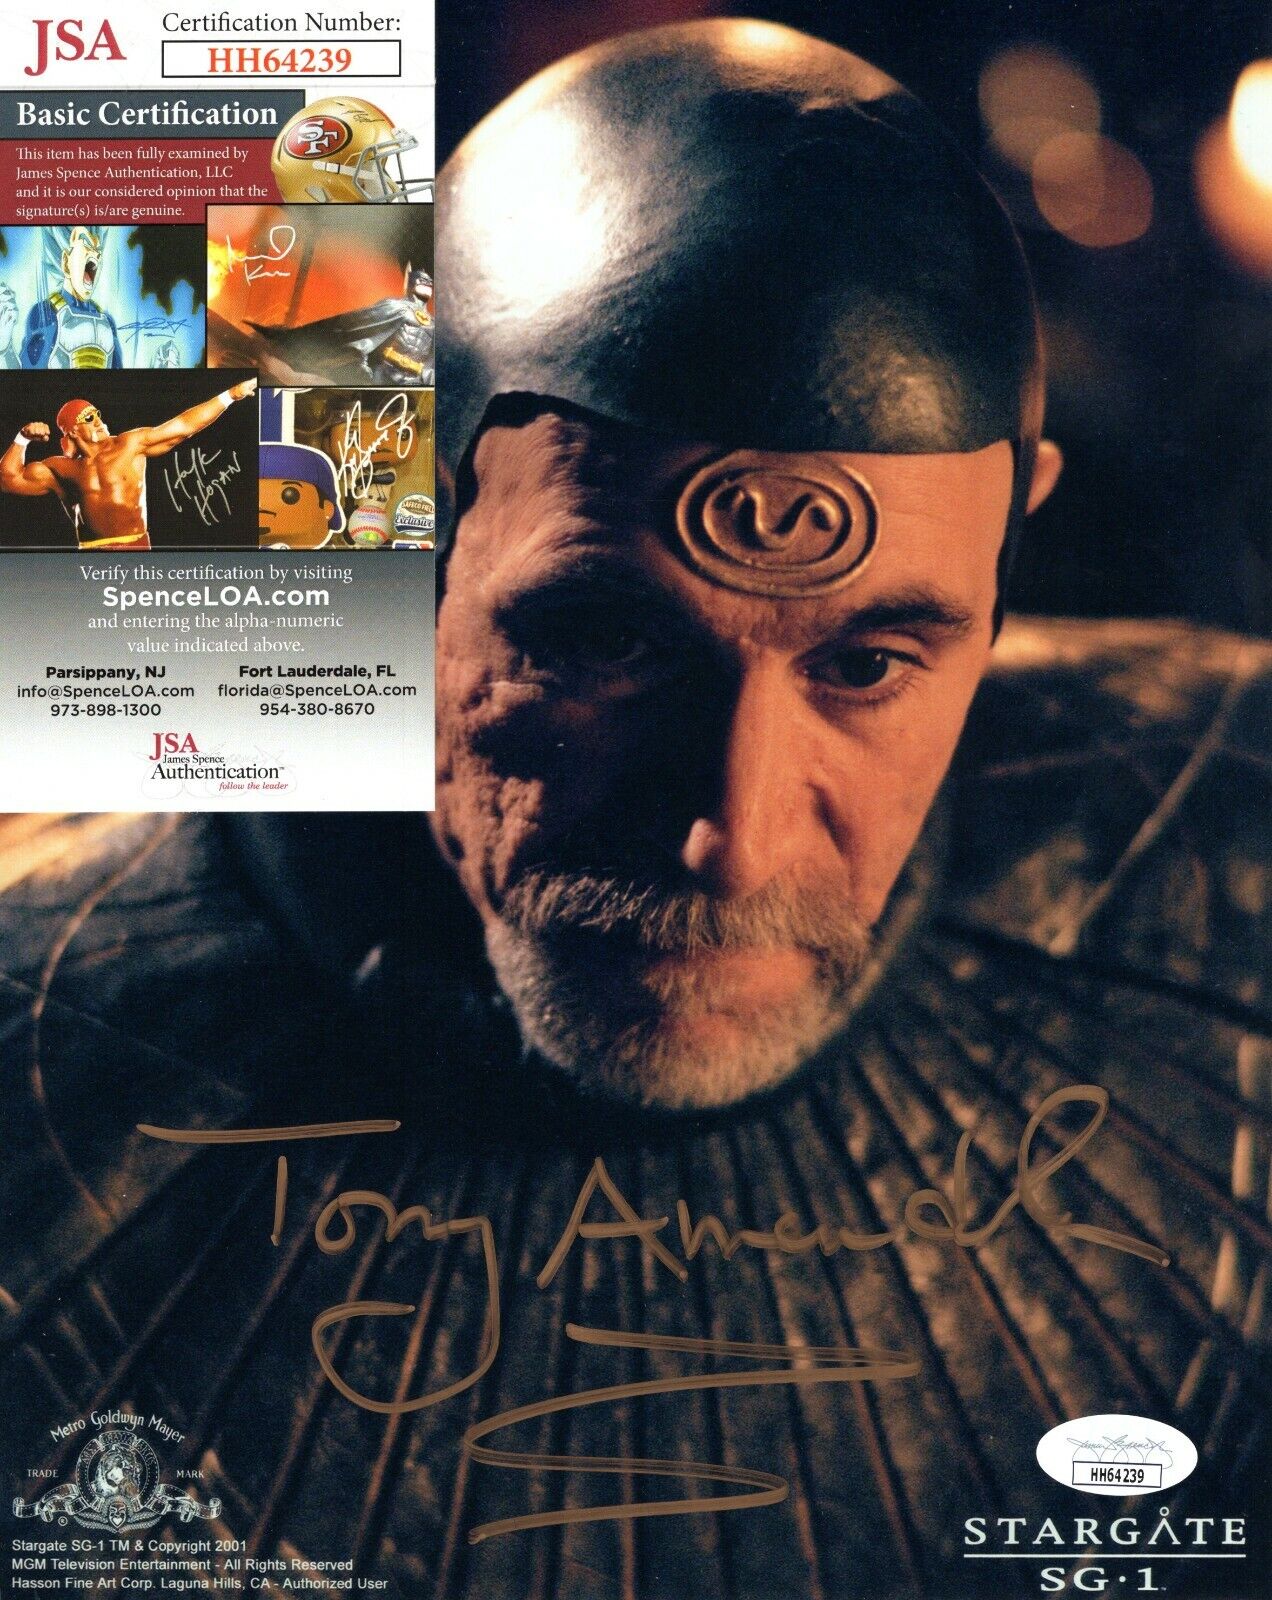 Tony Amendola Stargate SG-1 Actor Hand Signed Autograph 8x10 Photo Poster painting with JSA COA